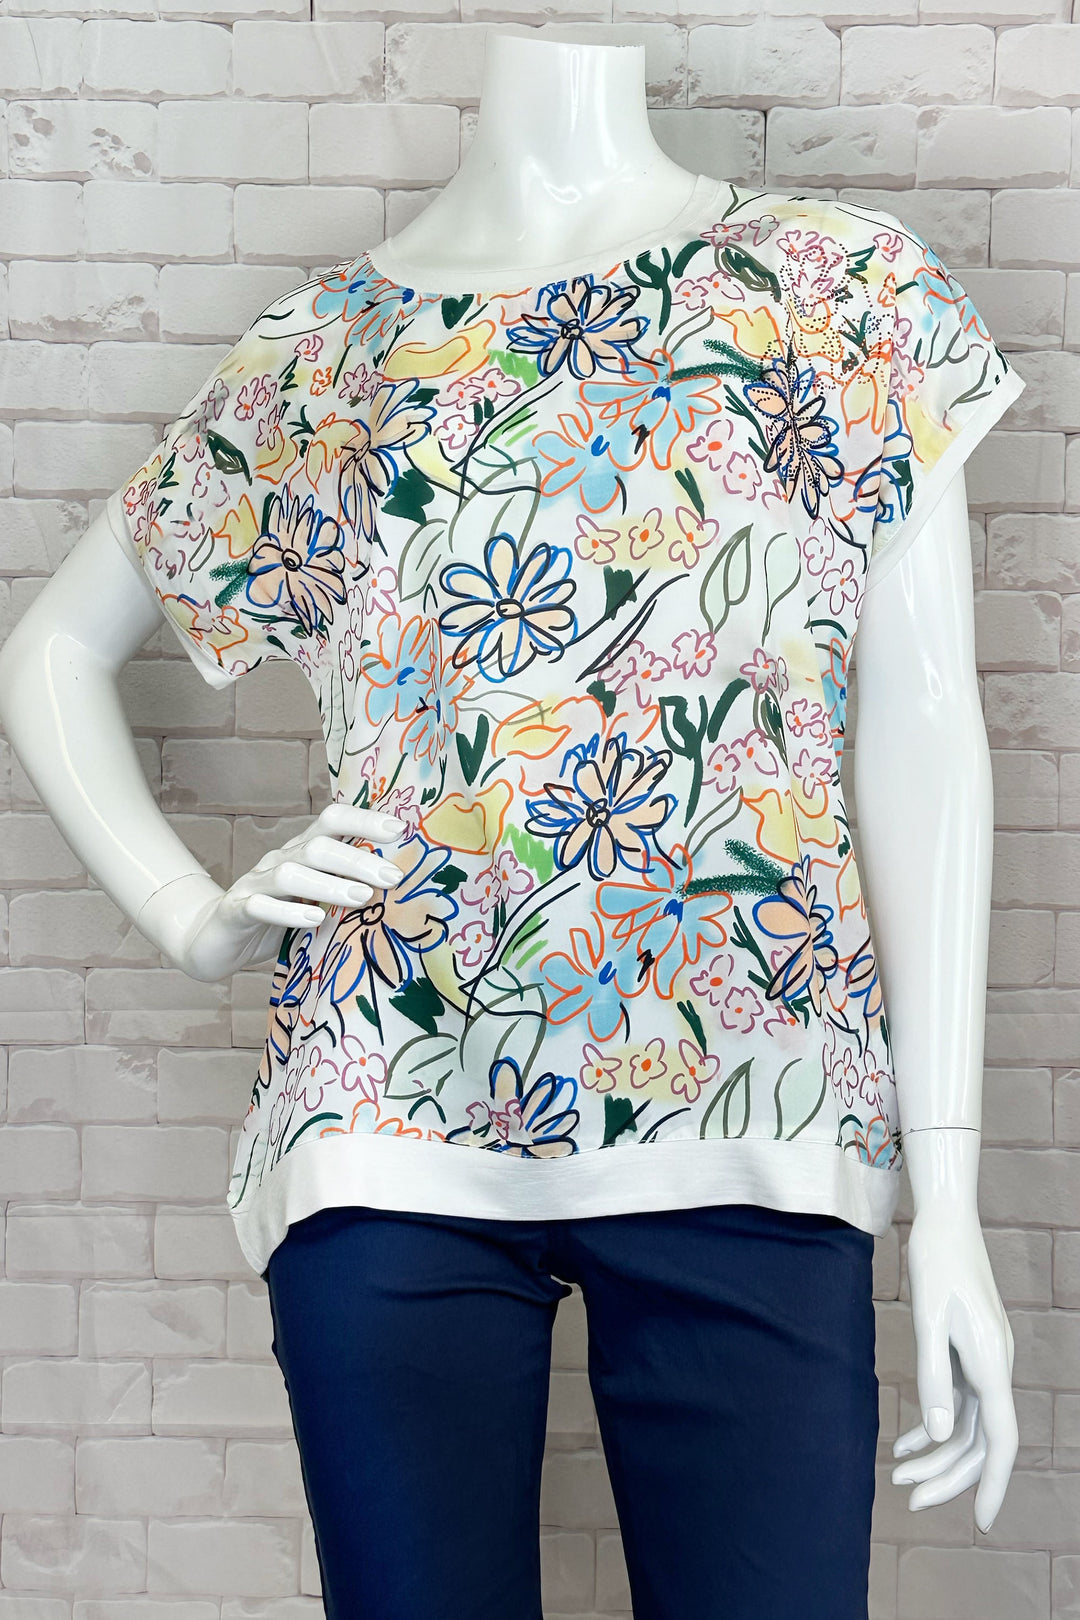 Ness Spring 2024 The round neckline and short sleeves make it easy and comfortable to wear, while the colourful and dazzling spring floral print on the front adds a touch of fun and playfulness to any outfit.